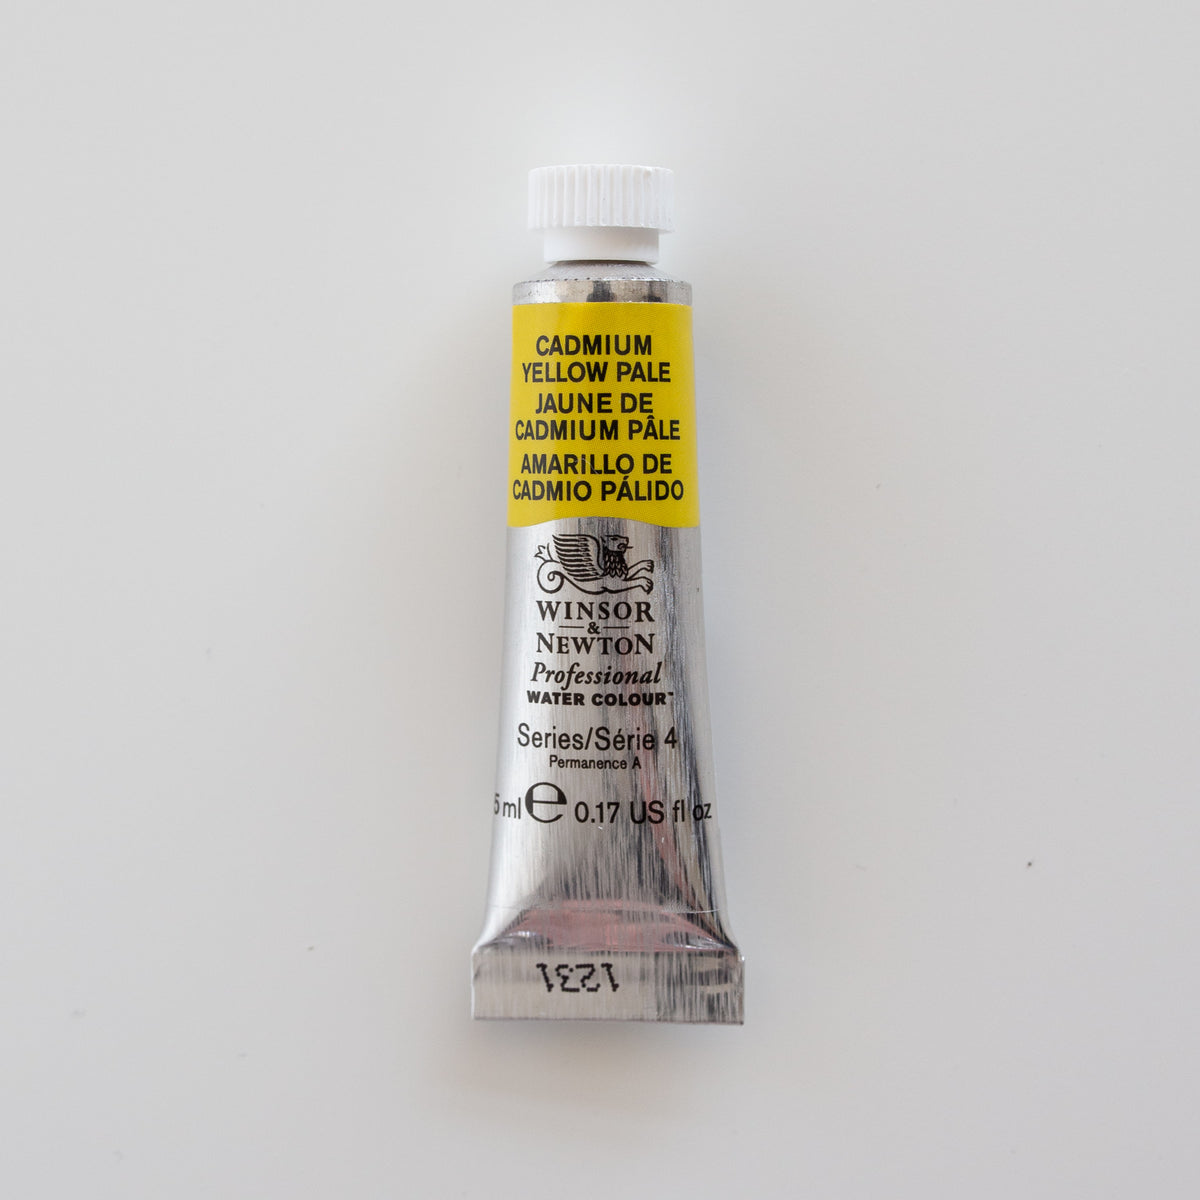 Winsor & Newton Professional Water Colours 5ml Cadmium Yellow Pale 4